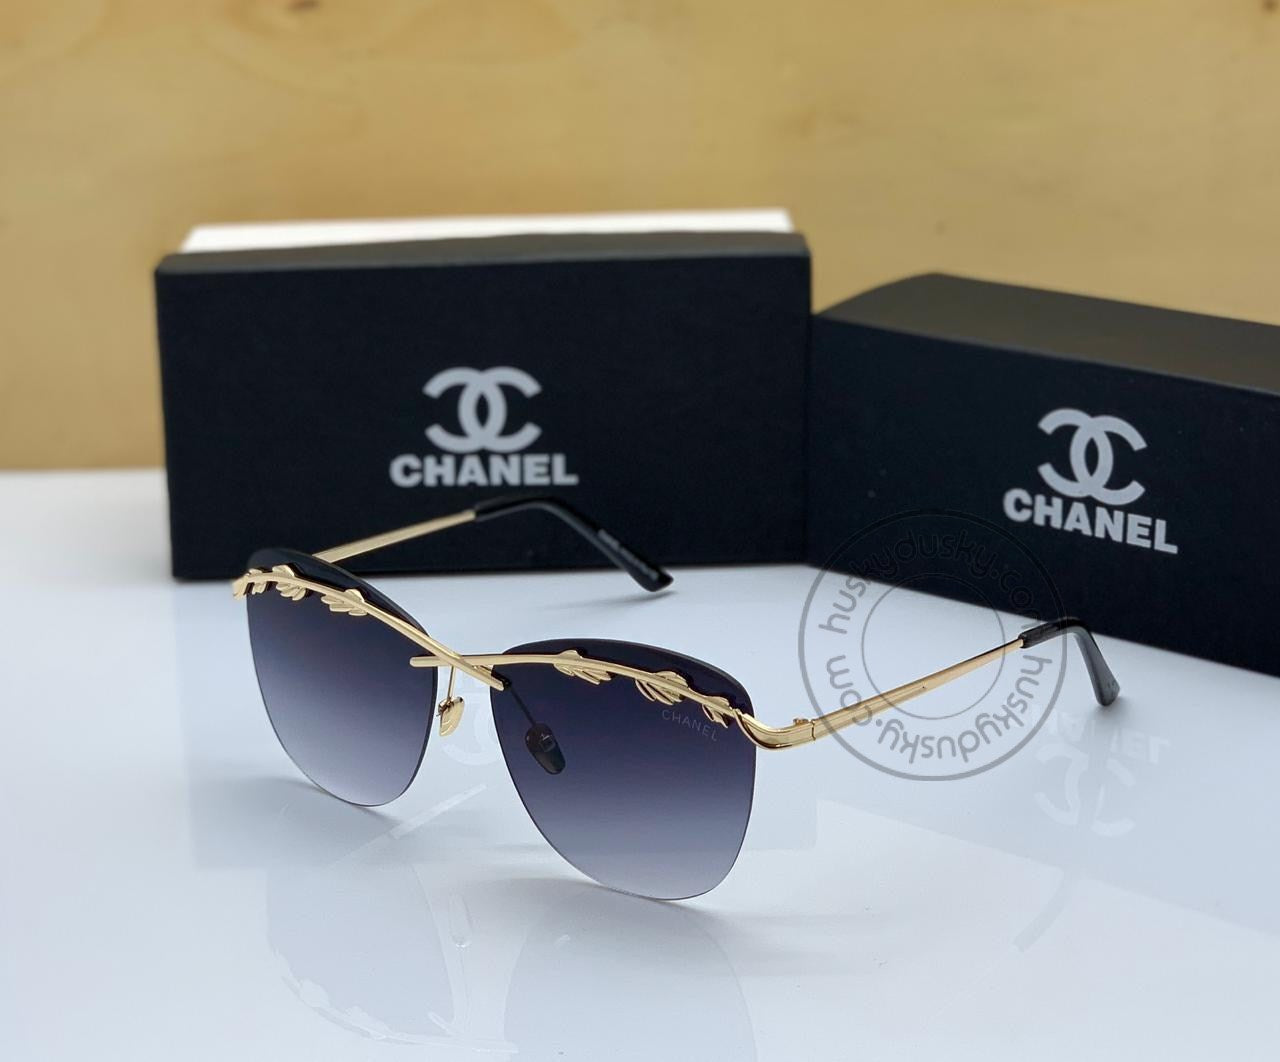 Chanel Branded Black Glass Women's Sunglass For Woman or Girl CHA-787 Gold And Black Stick Gift Sunglass